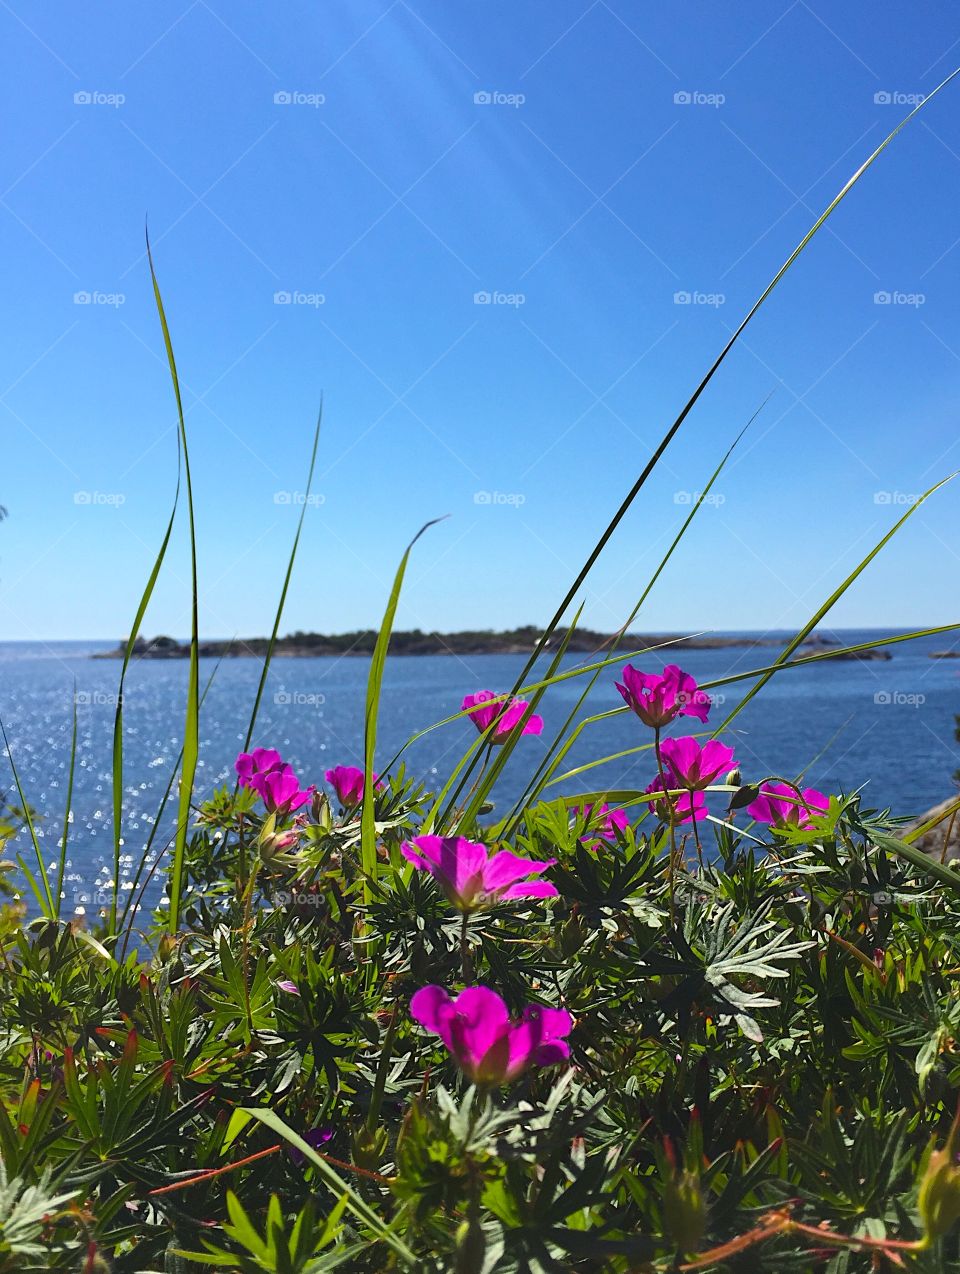 Stangholmen, Risør, Norway. The wiew from a path alongside the ocean